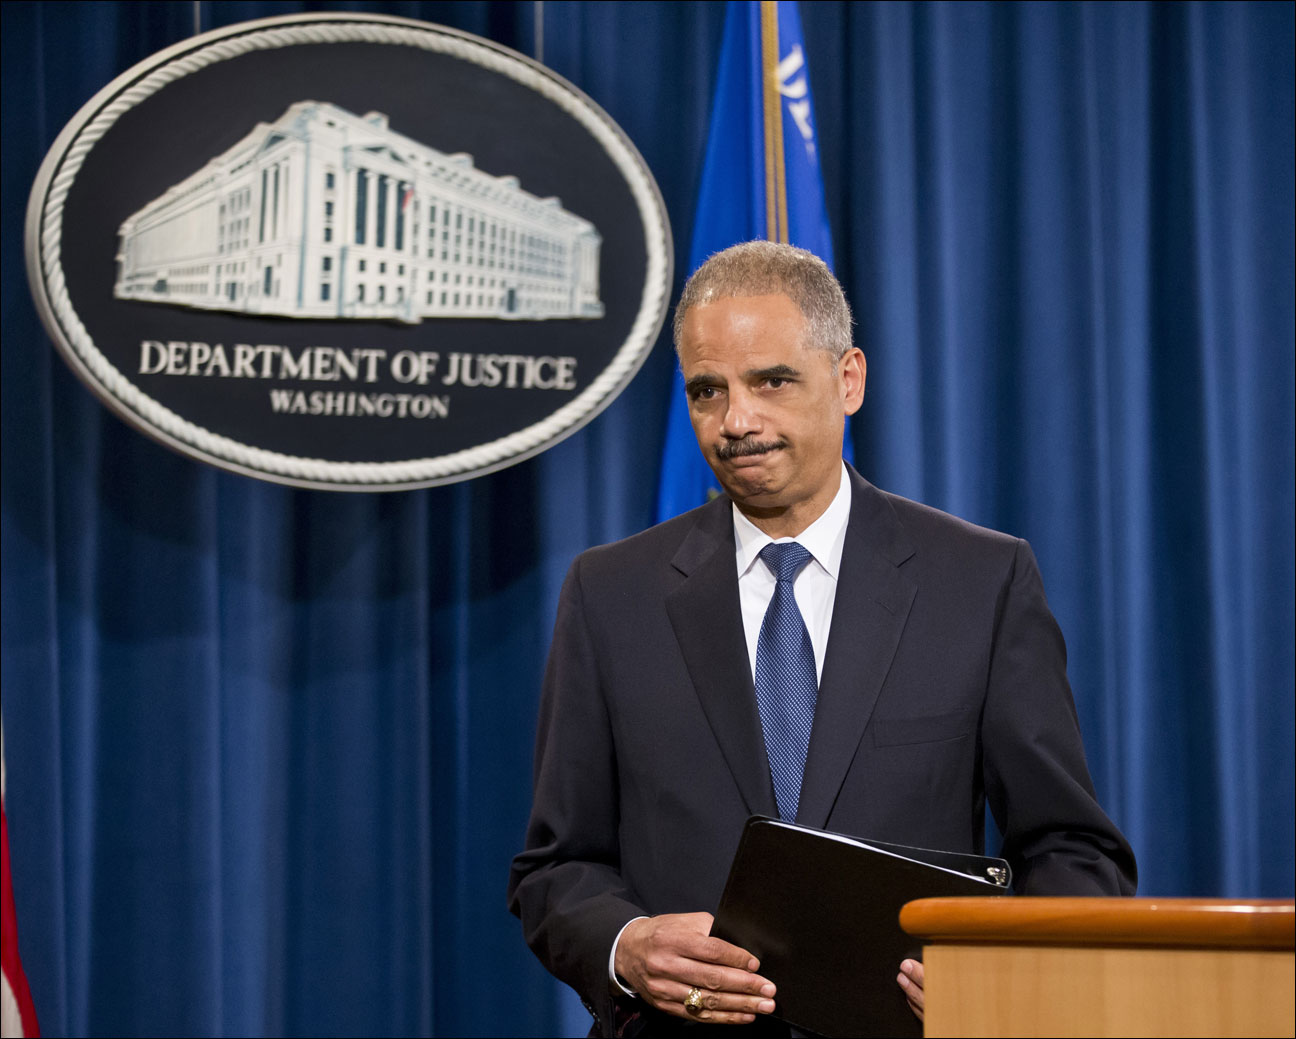 Attorney General Eric Holder leaves a news conference at the Justice Department in Washington. If the Obama administration seeks the death penalty against Boston Marathon bombing suspect Dzhokhar Tsarnaev, it would face a long, difficult legal battle with uncertain prospects for success in a state that hasn’t seen an execution in nearly 70 years. Attorney General Eric Holder will have to decide several months before the start of any trial whether to seek death for Tsarnaev. It is the highest-profile death-penalty decision yet to come before Holder, who personally opposes the death penalty. (AP Photo/J. Scott Applewhite, File)